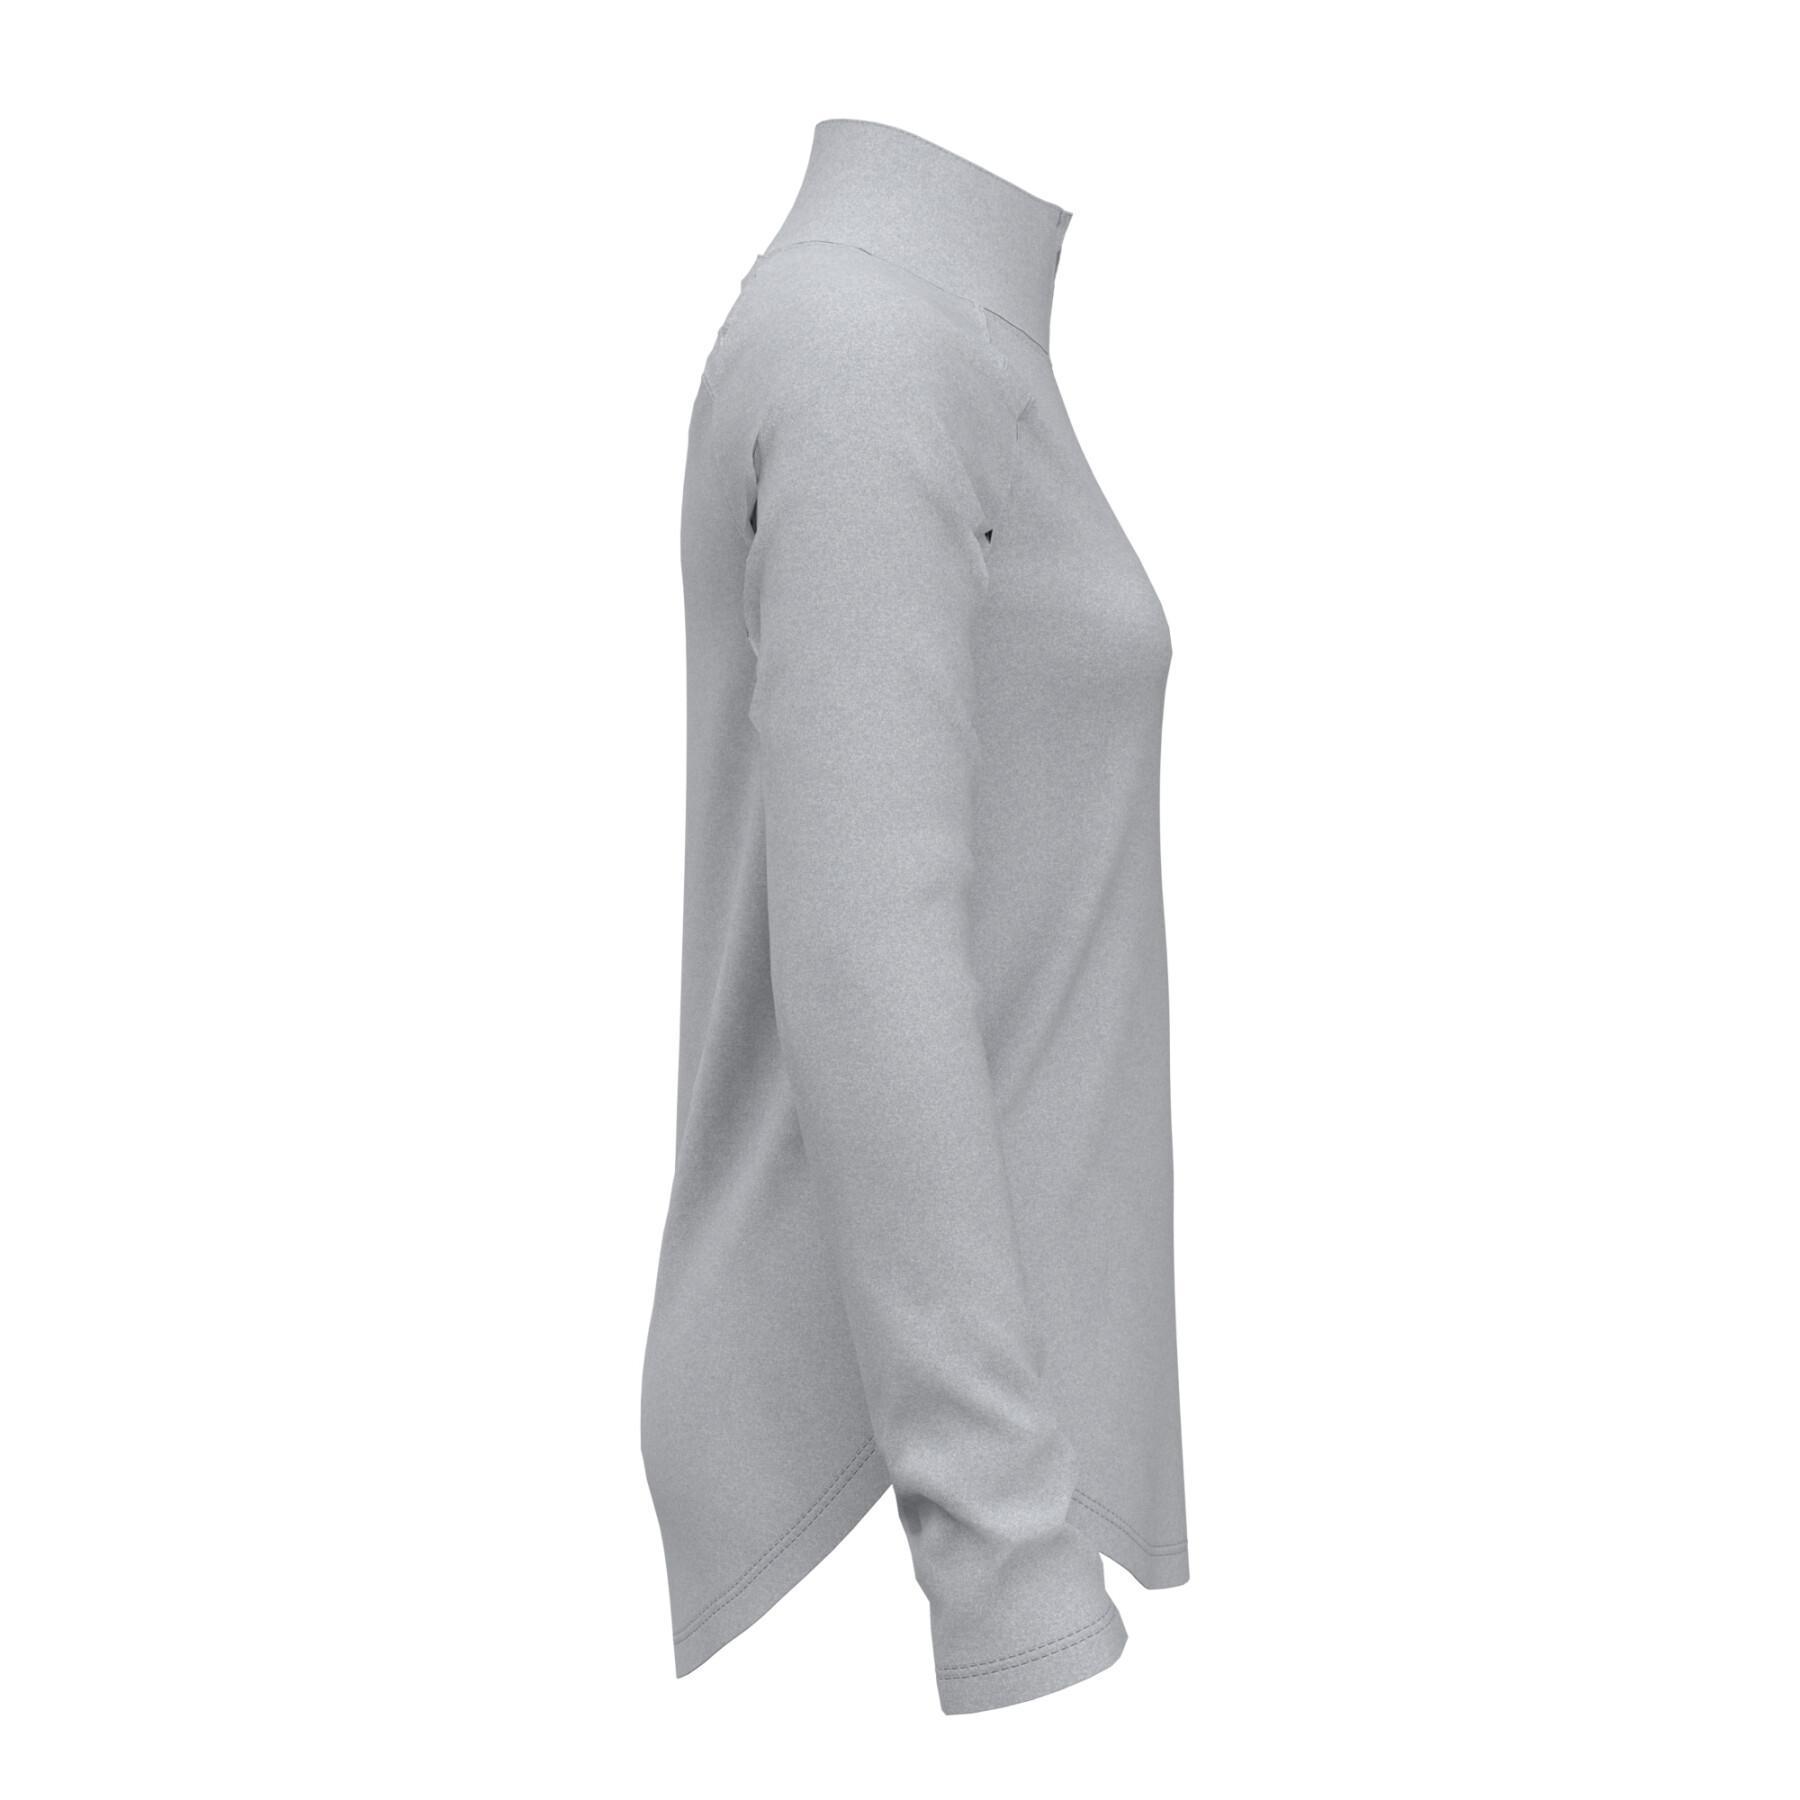 Maillot manches longues 1/2 zip fille Under Armour Tech Graphic